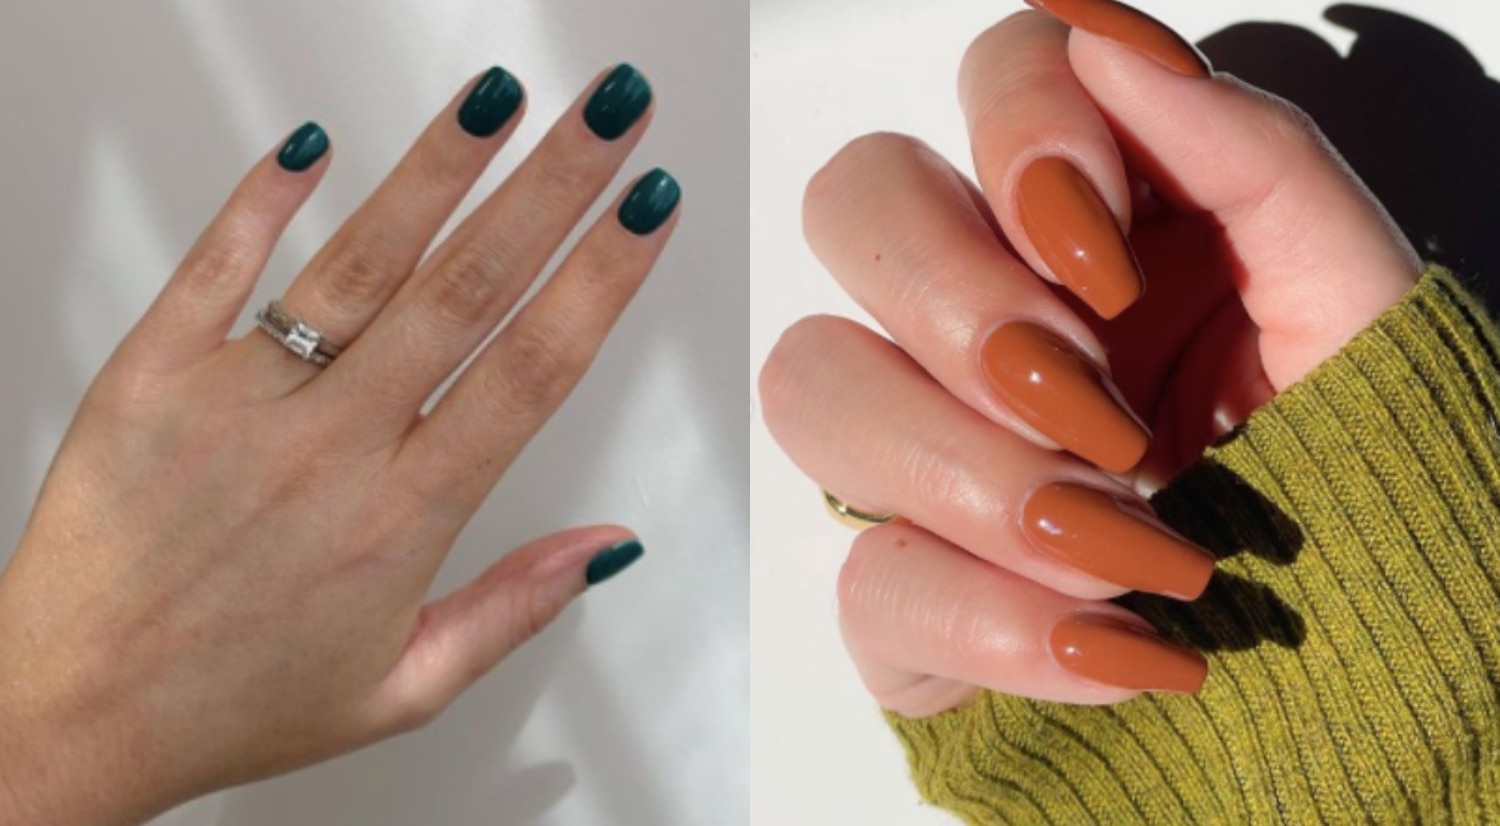 1. "The Best Winter Nail Colors for 2021" - wide 2